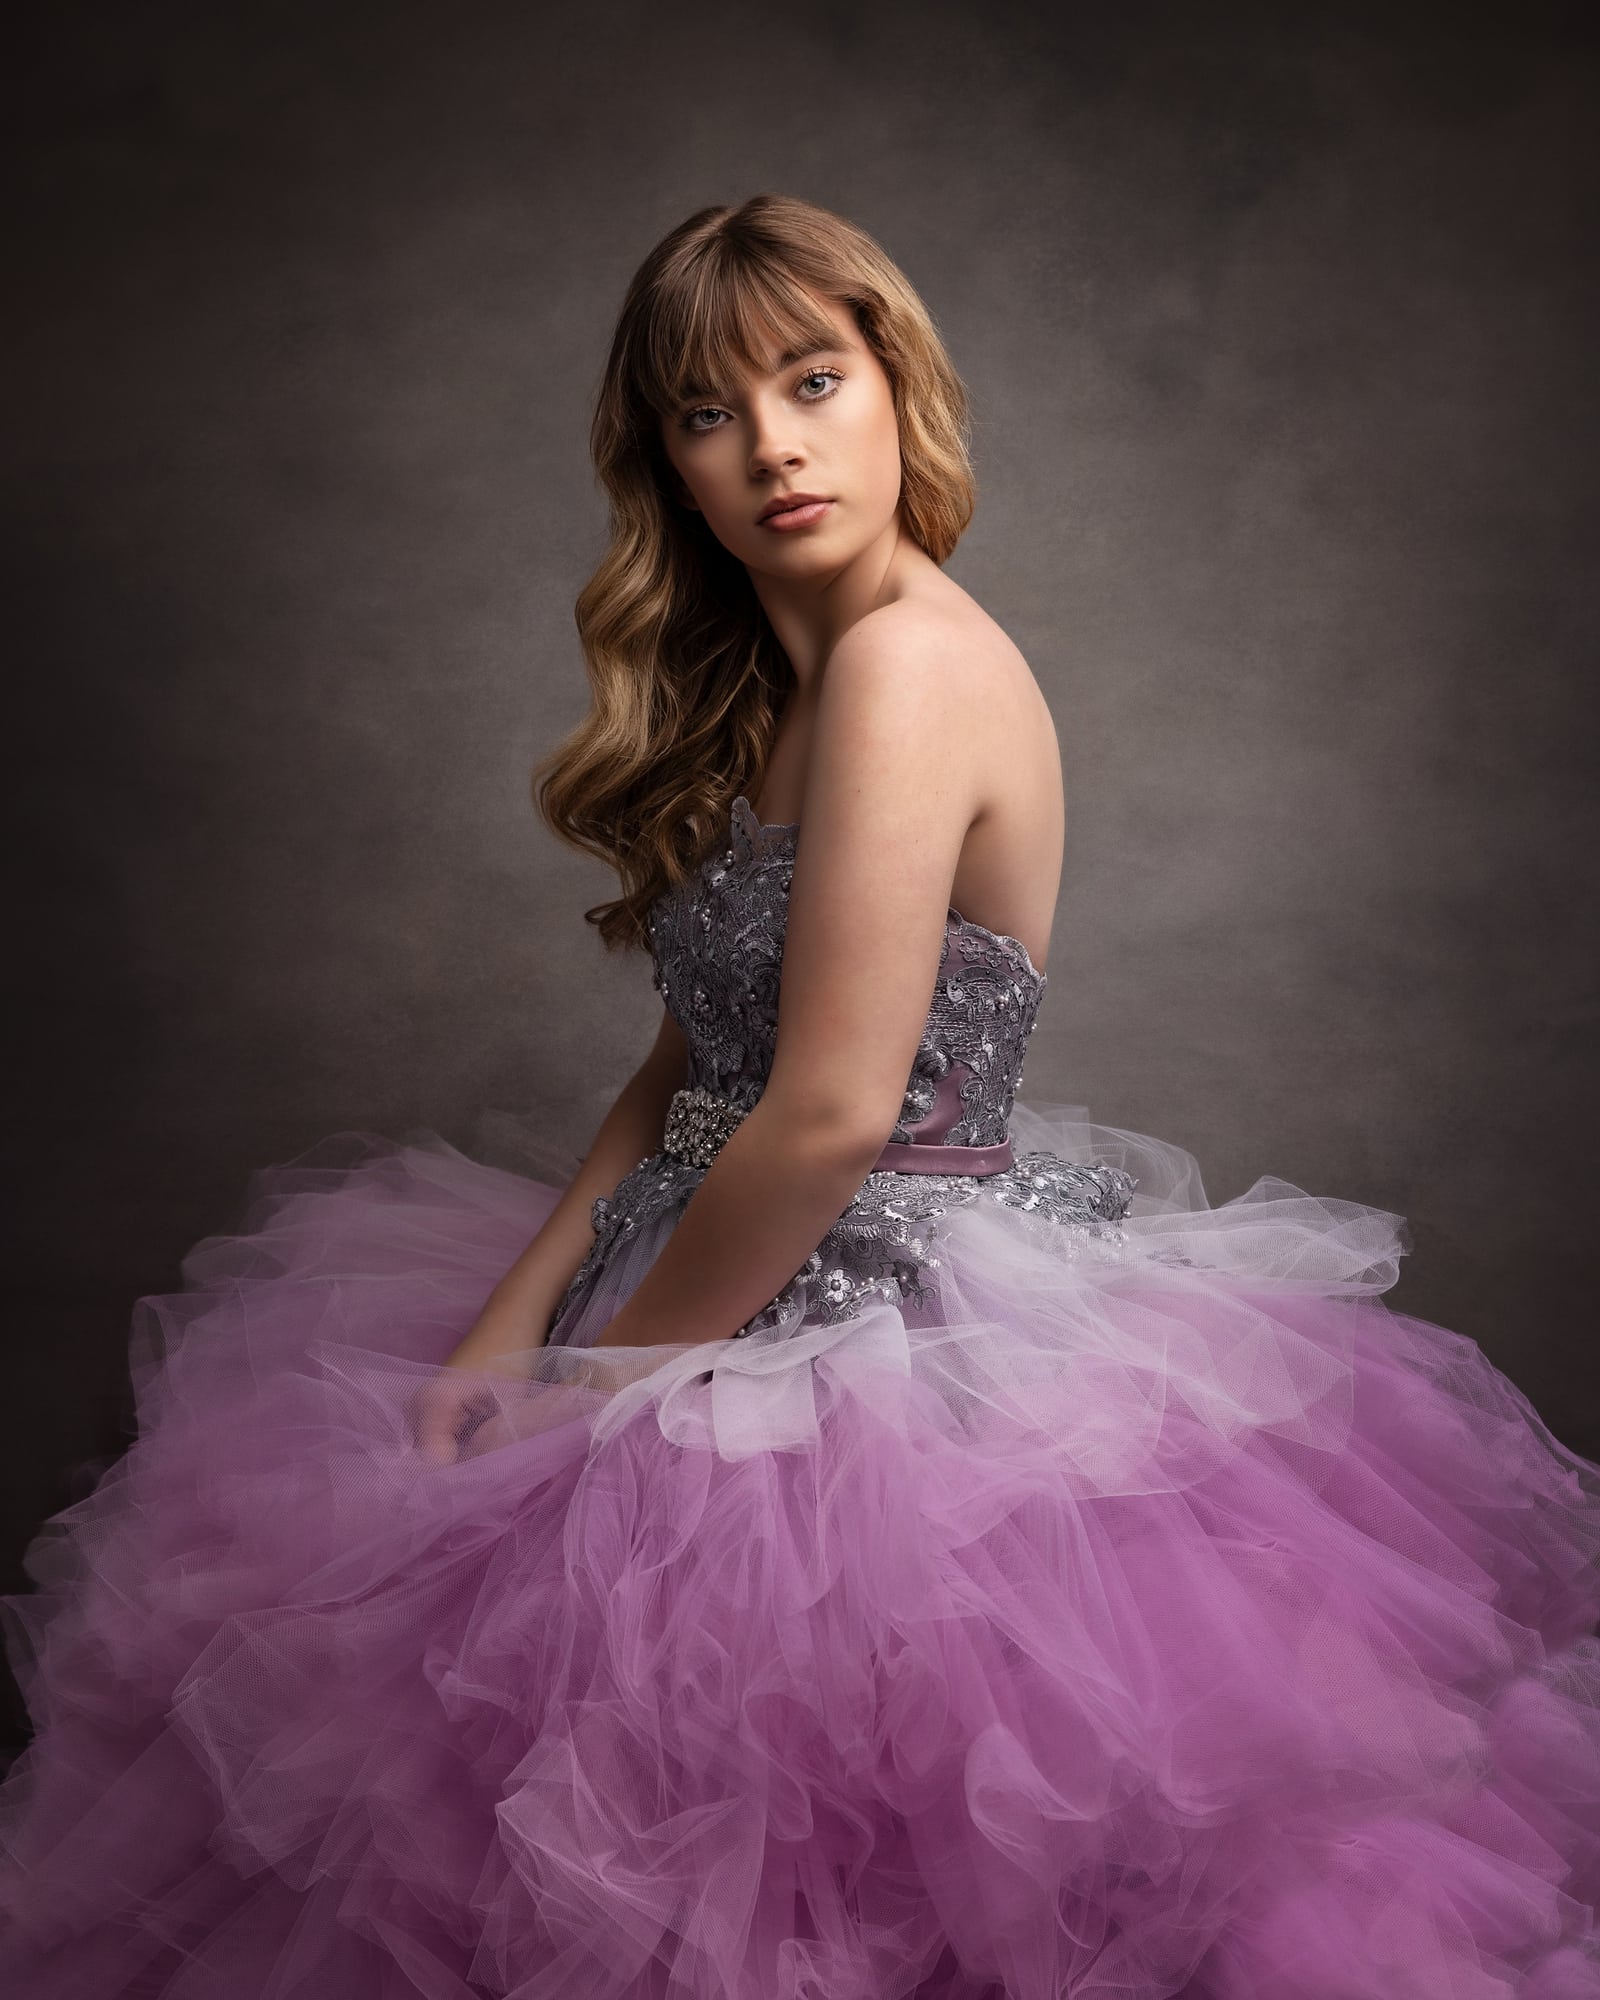 Teenage girl in a purple tulle dress looks at the camera